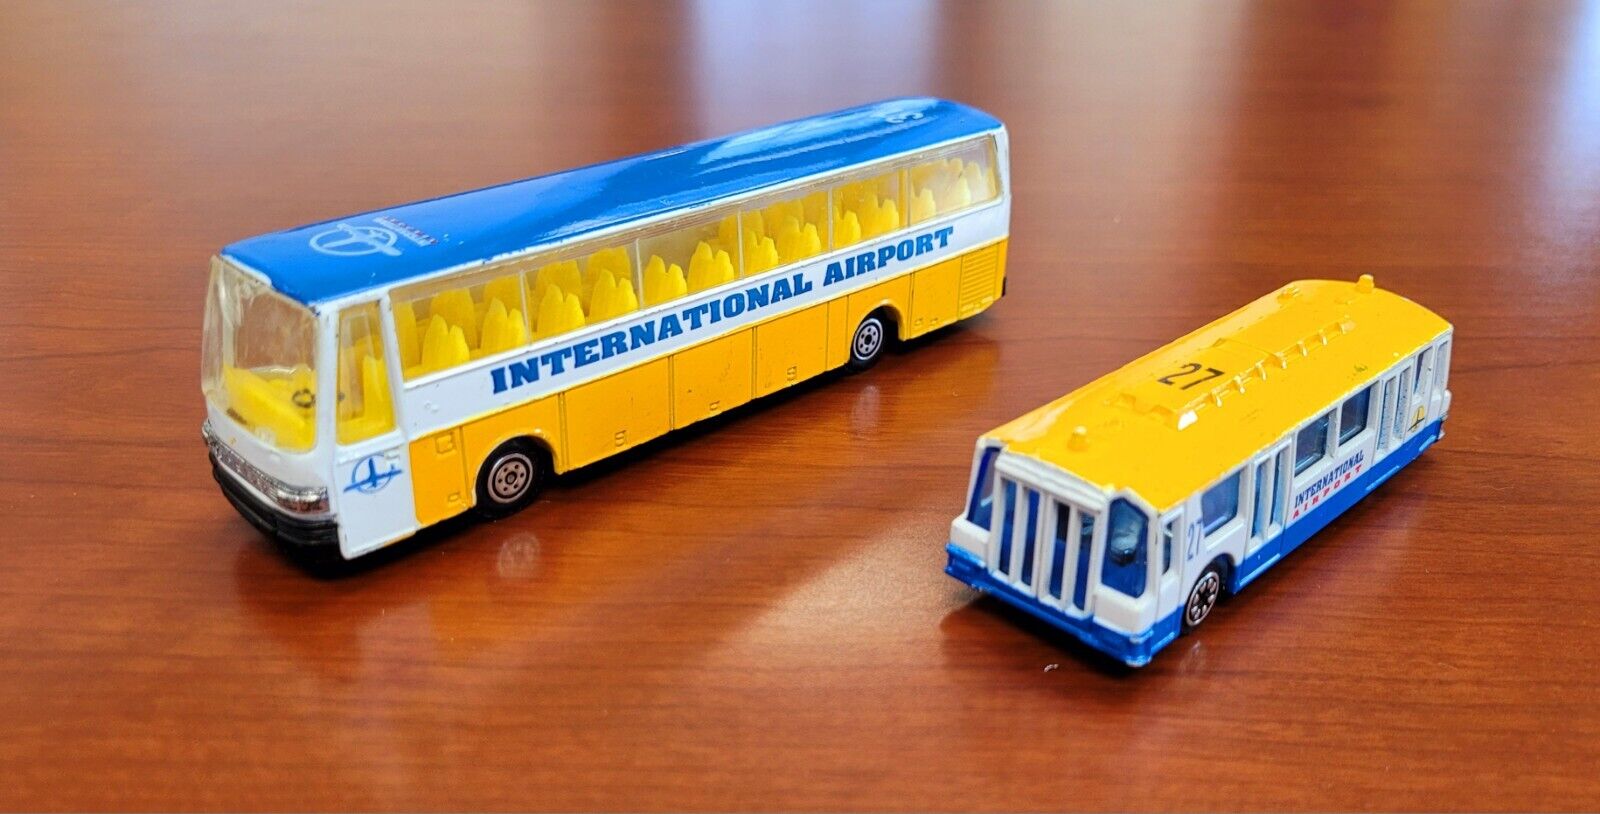 UNITED AIRLINES International Airport BUS / shuttle bus set Unbranded